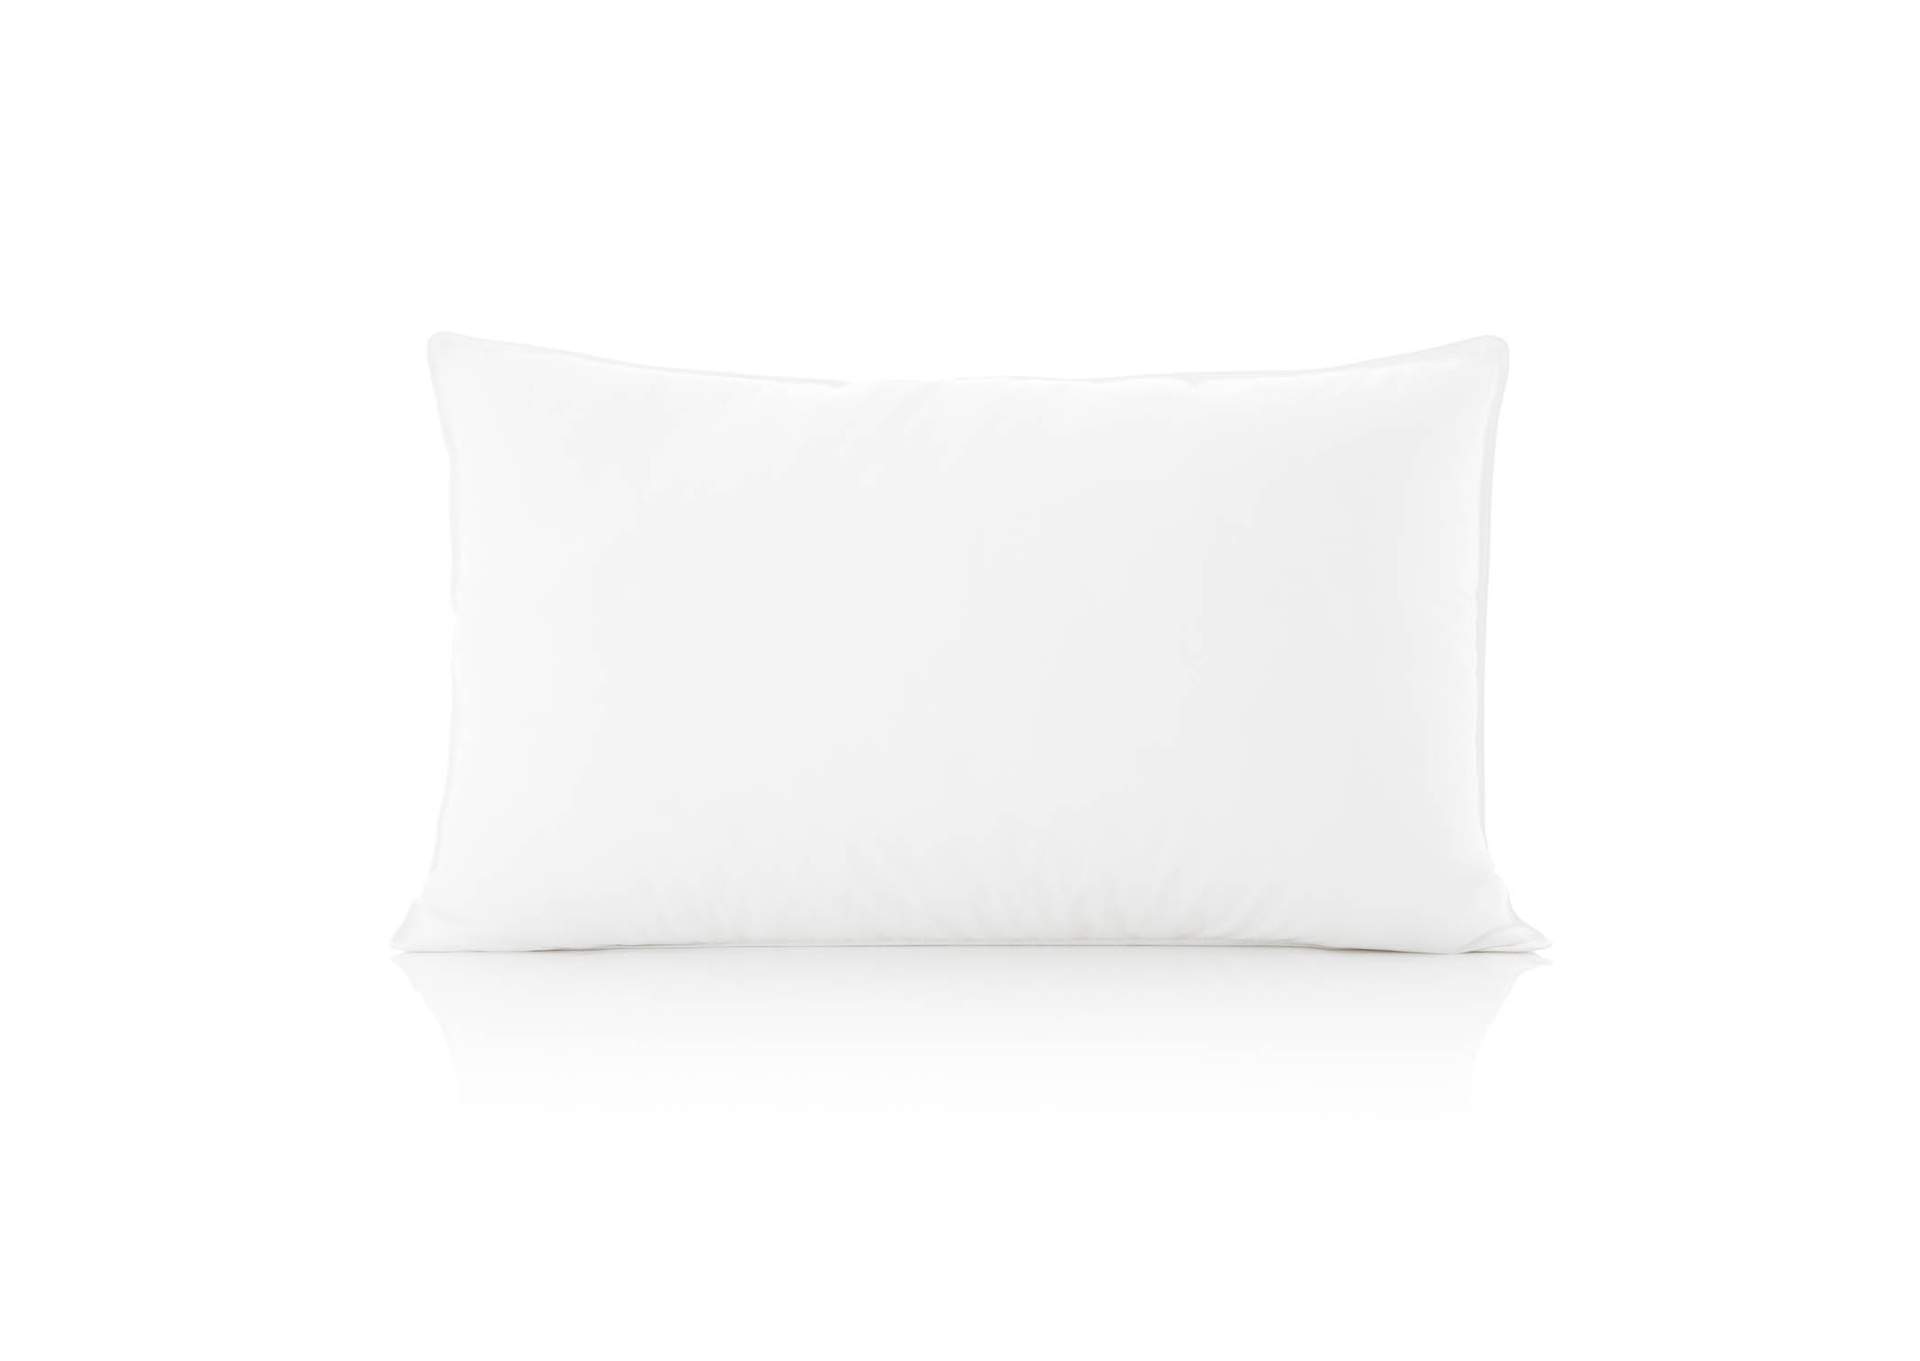 Malouf Compressed -1-Pack Pillow - Queen Size,Malouf